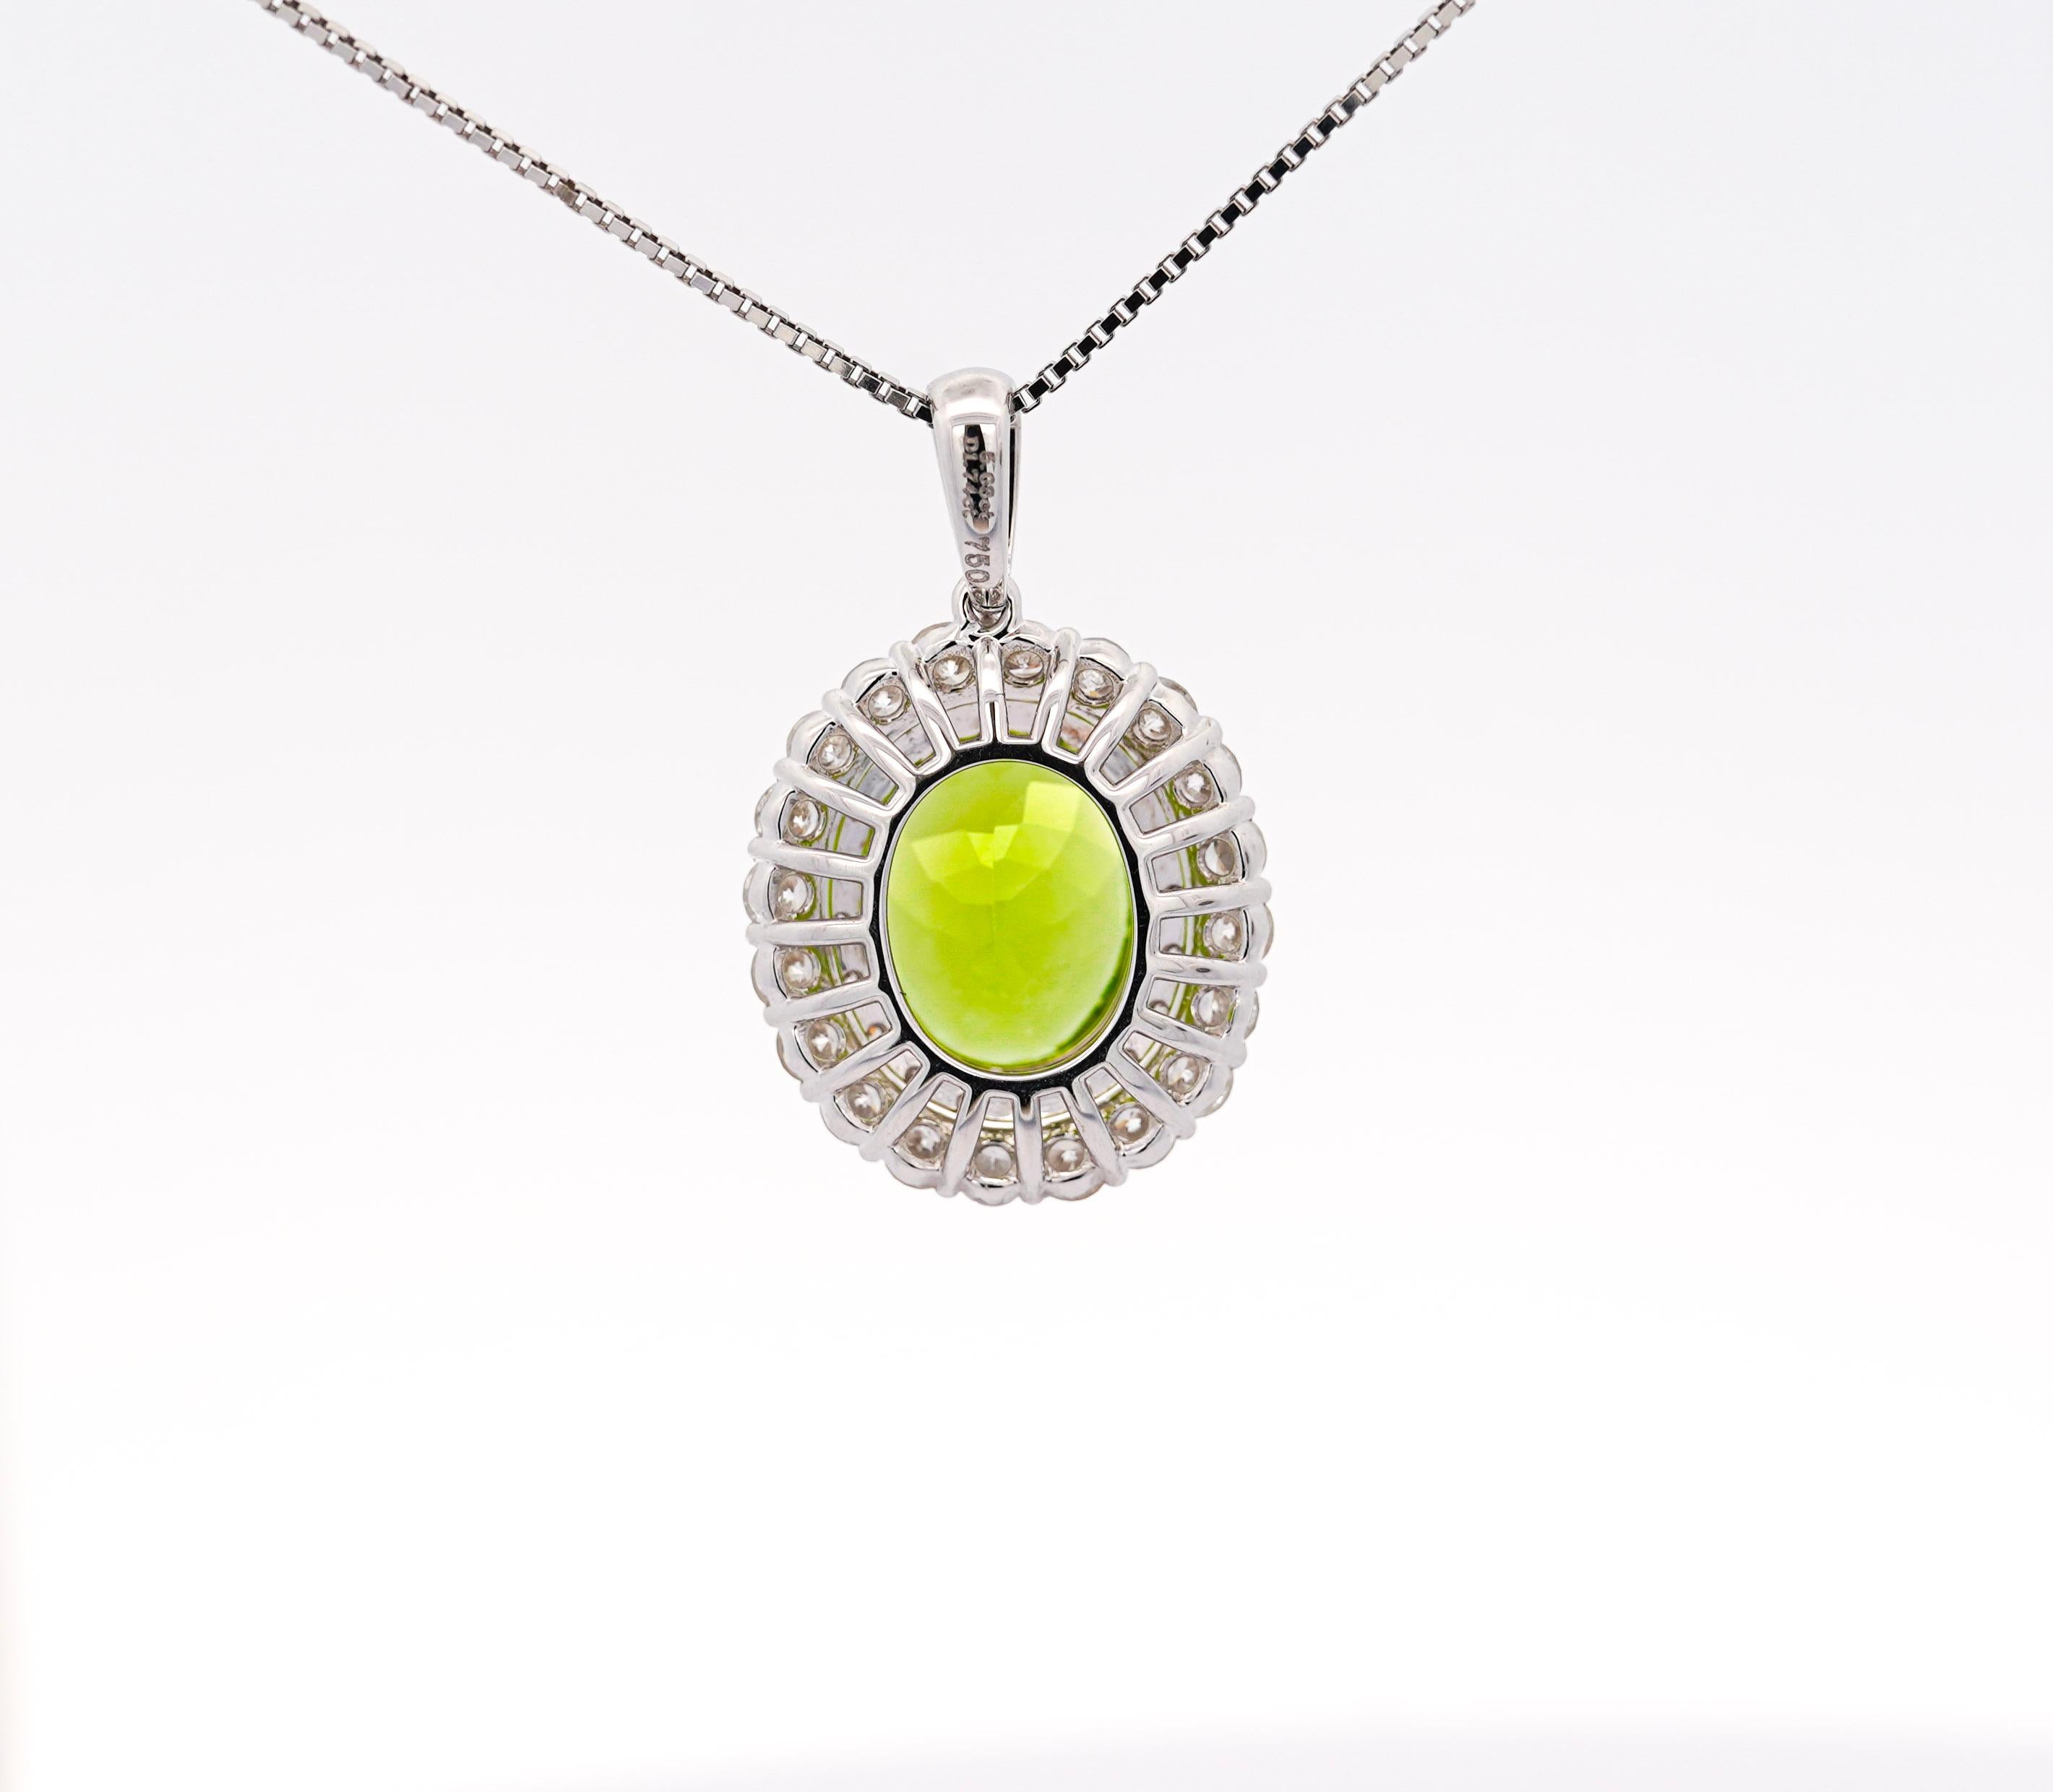 Oval Cut 5.03 Carat Oval Peridot Pendant with Round Cut Diamond Halo in 18K White Gold For Sale